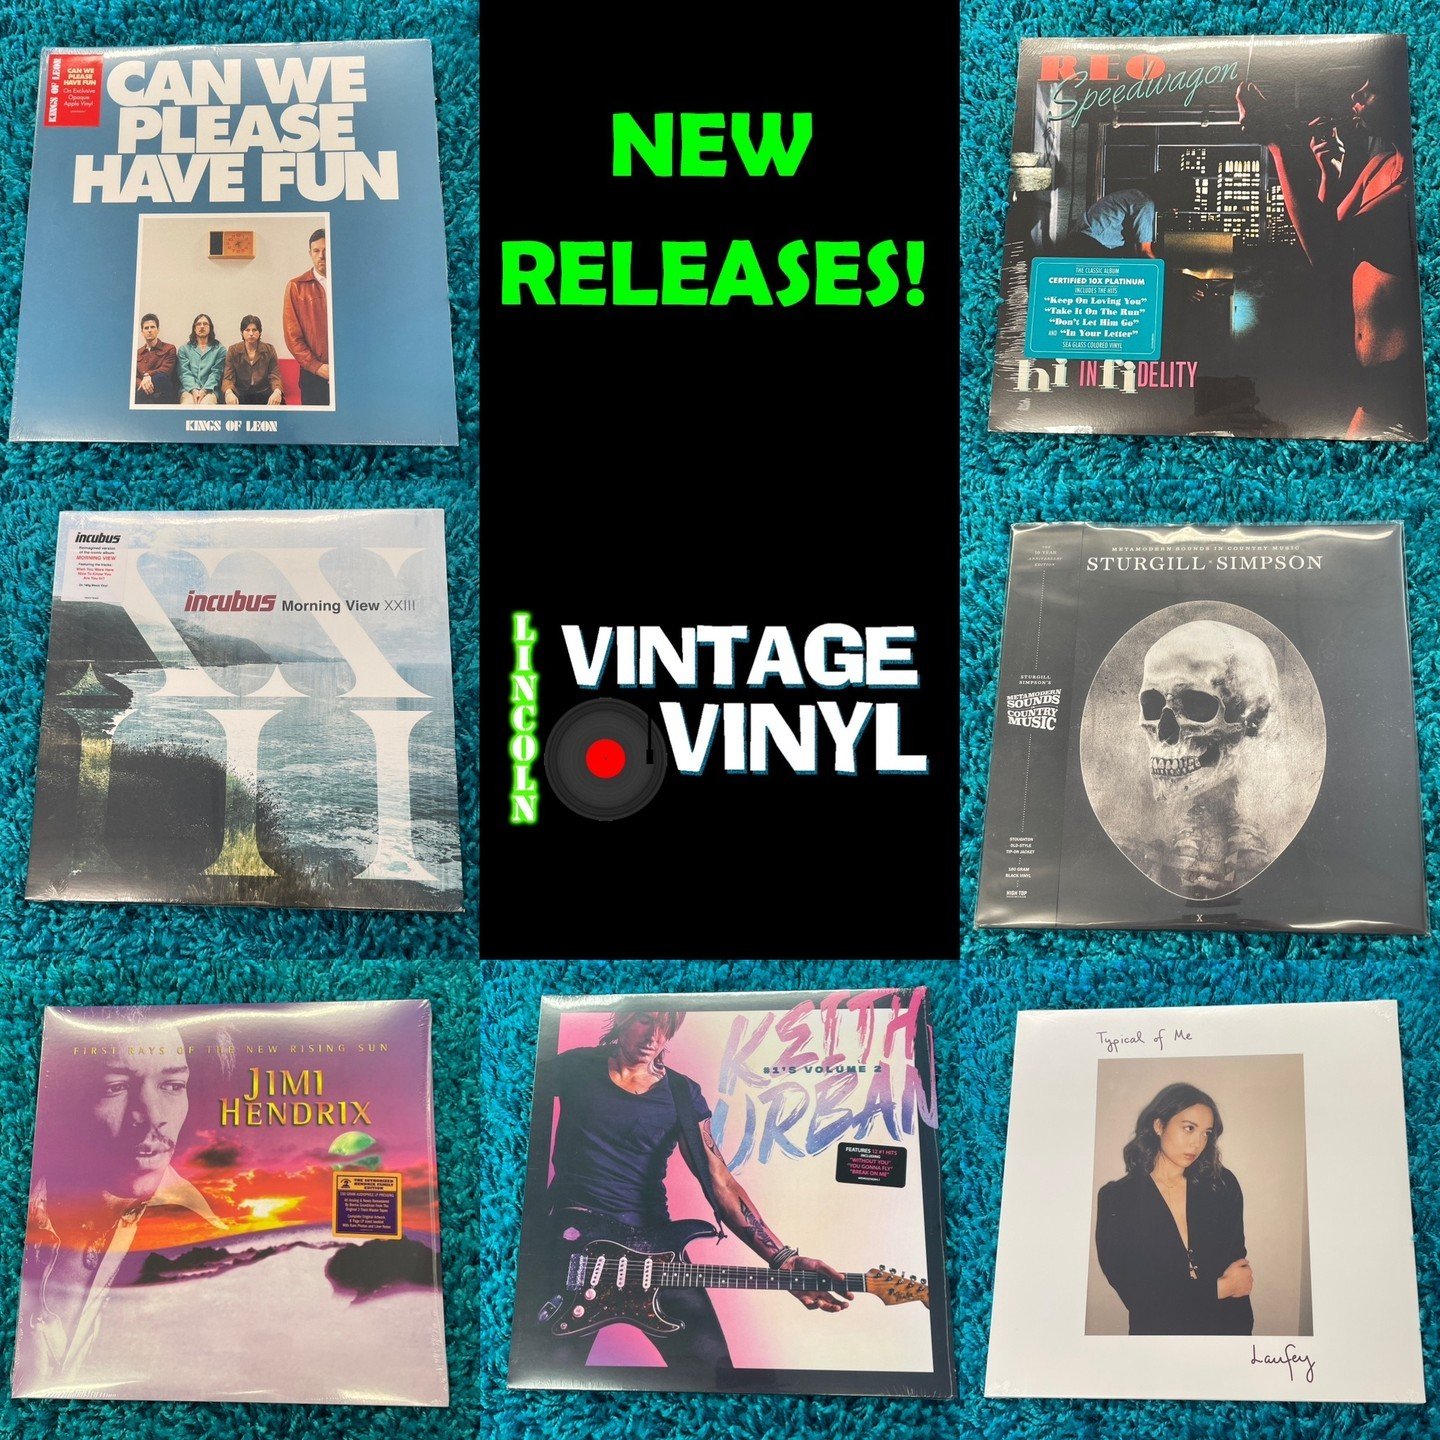 New Releases Available Tomorrow, Friday, May 10th!  If you see anything you'd like us to hold for you, let us know!
🔹 Kings Of Leon - Can We Please Have Fun
🔹 REO Speedwagon - Hi Infidelity (180 Gm Sea Glass Color Vinyl)
🔹 Incubus - Morning View X